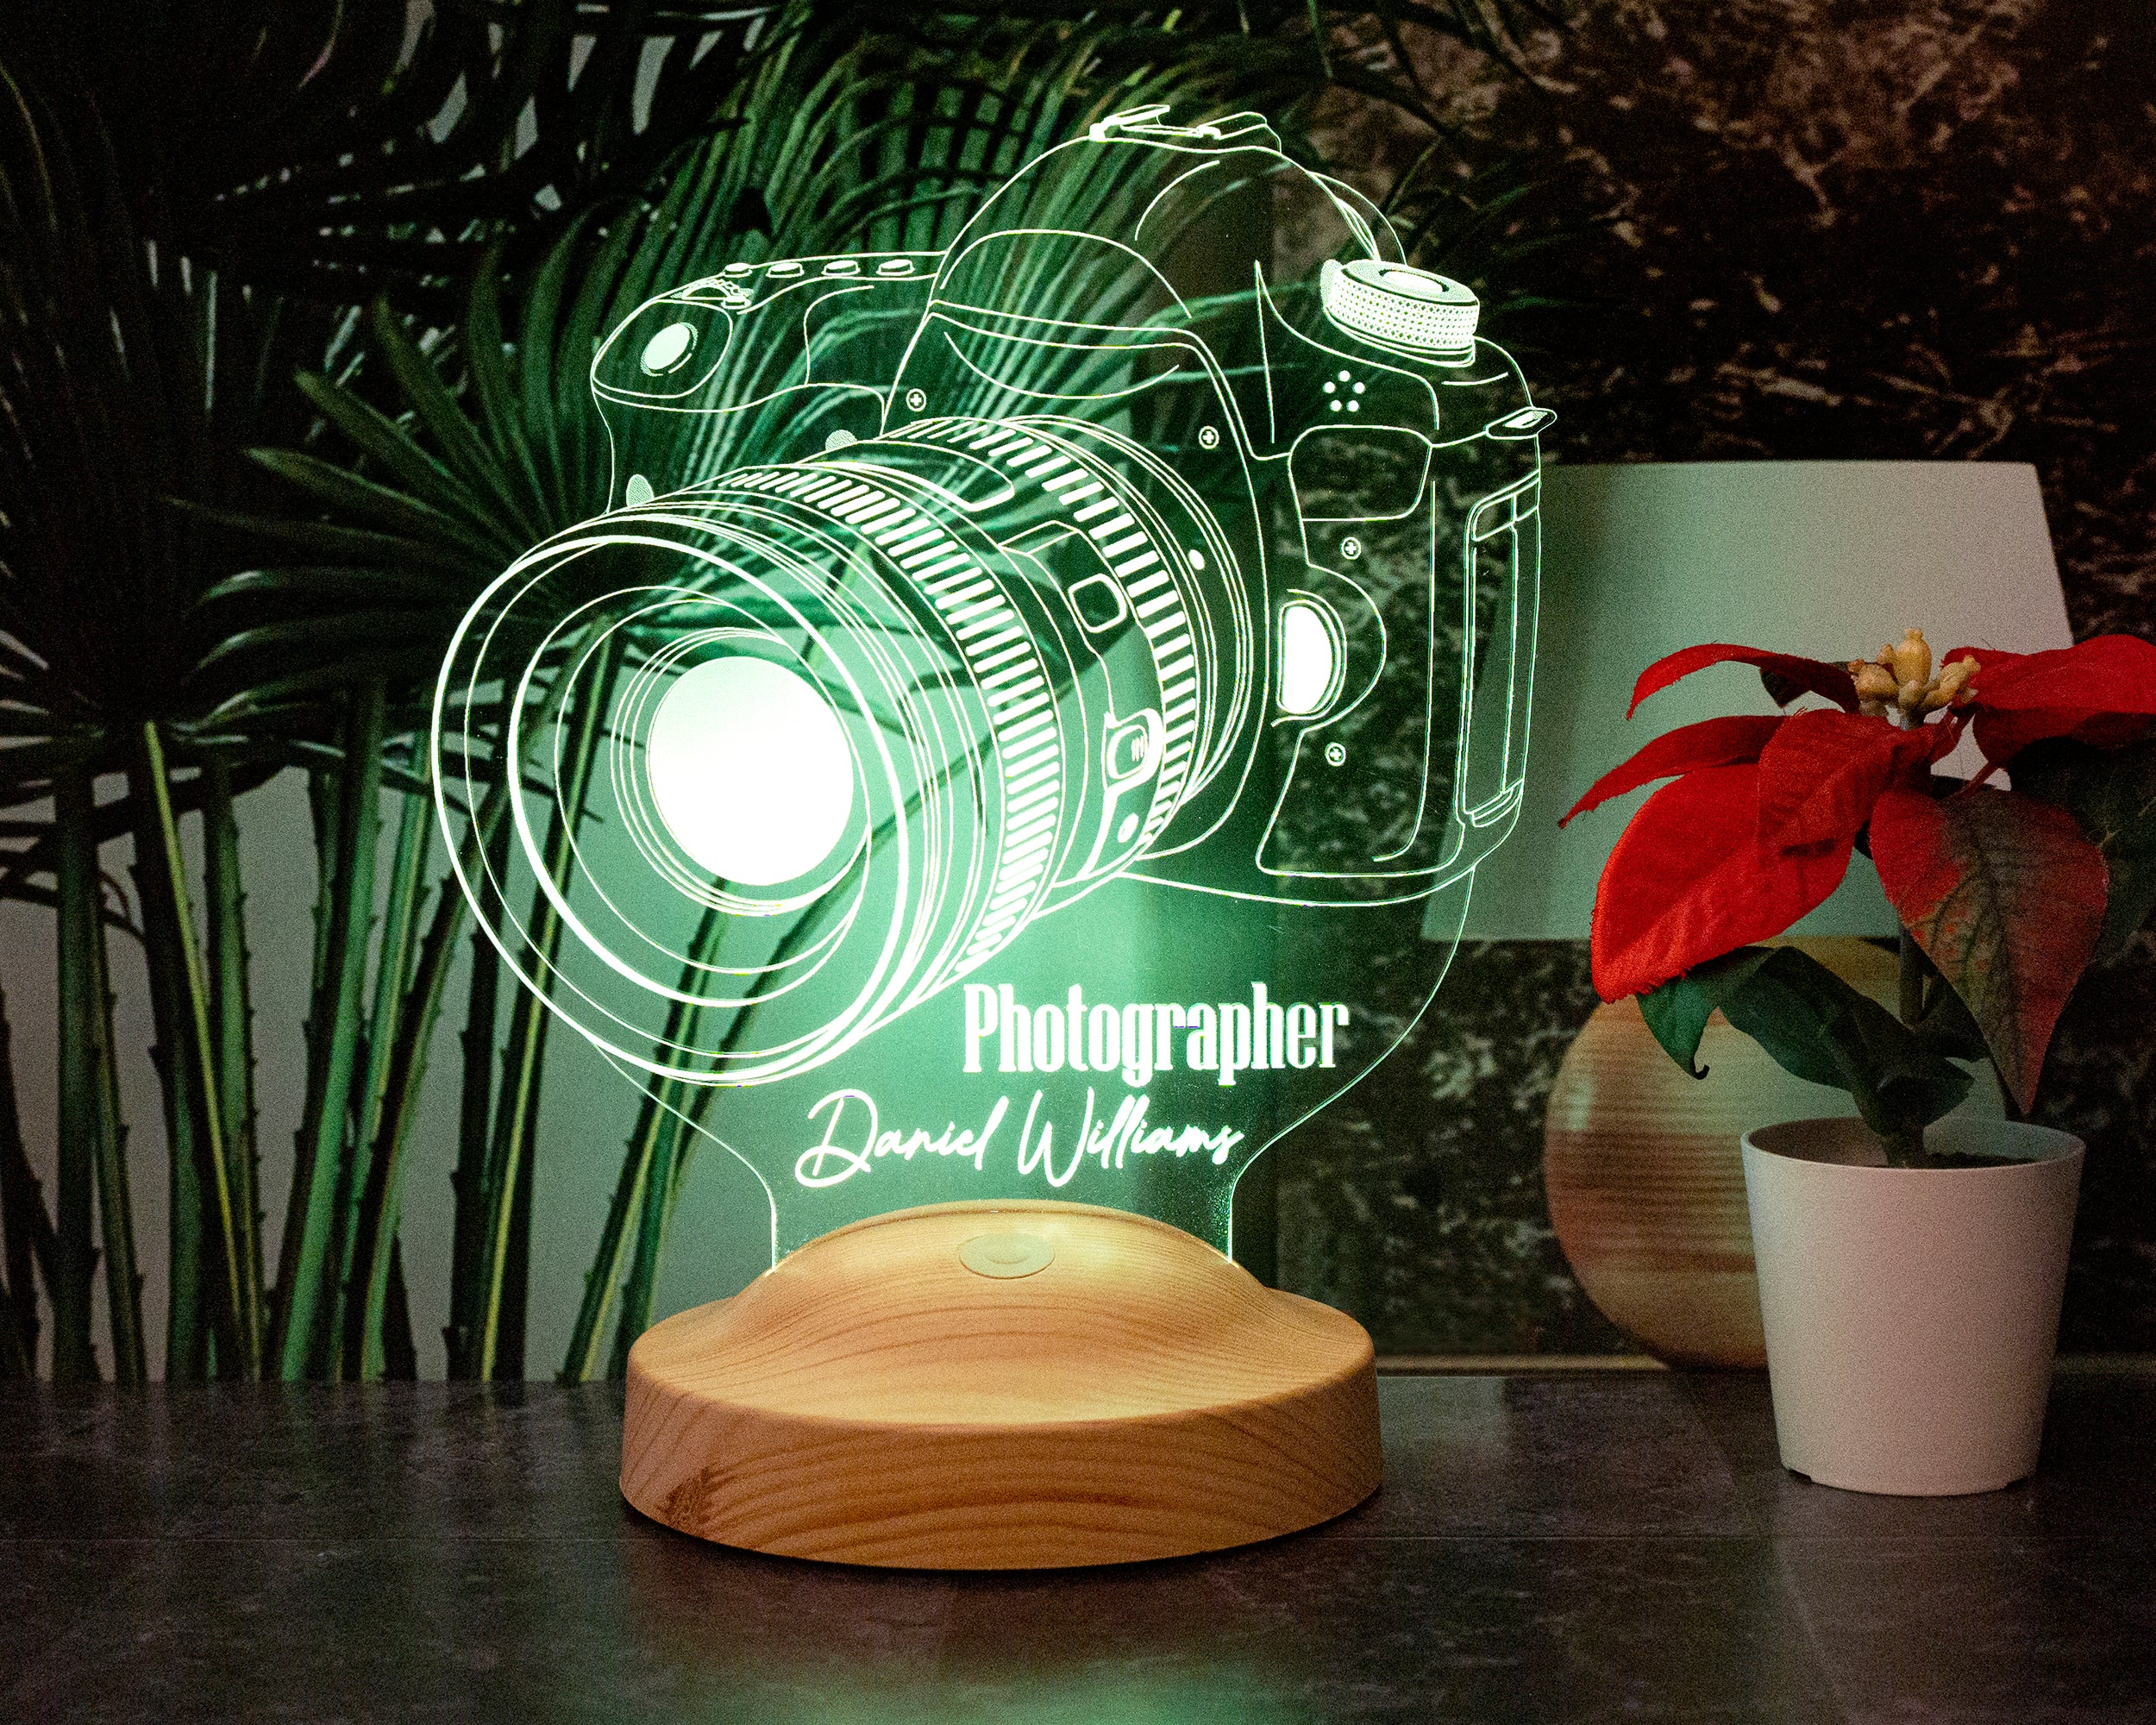 Photo camera LED lamp as a gift for photographers 3D illusion lamp 